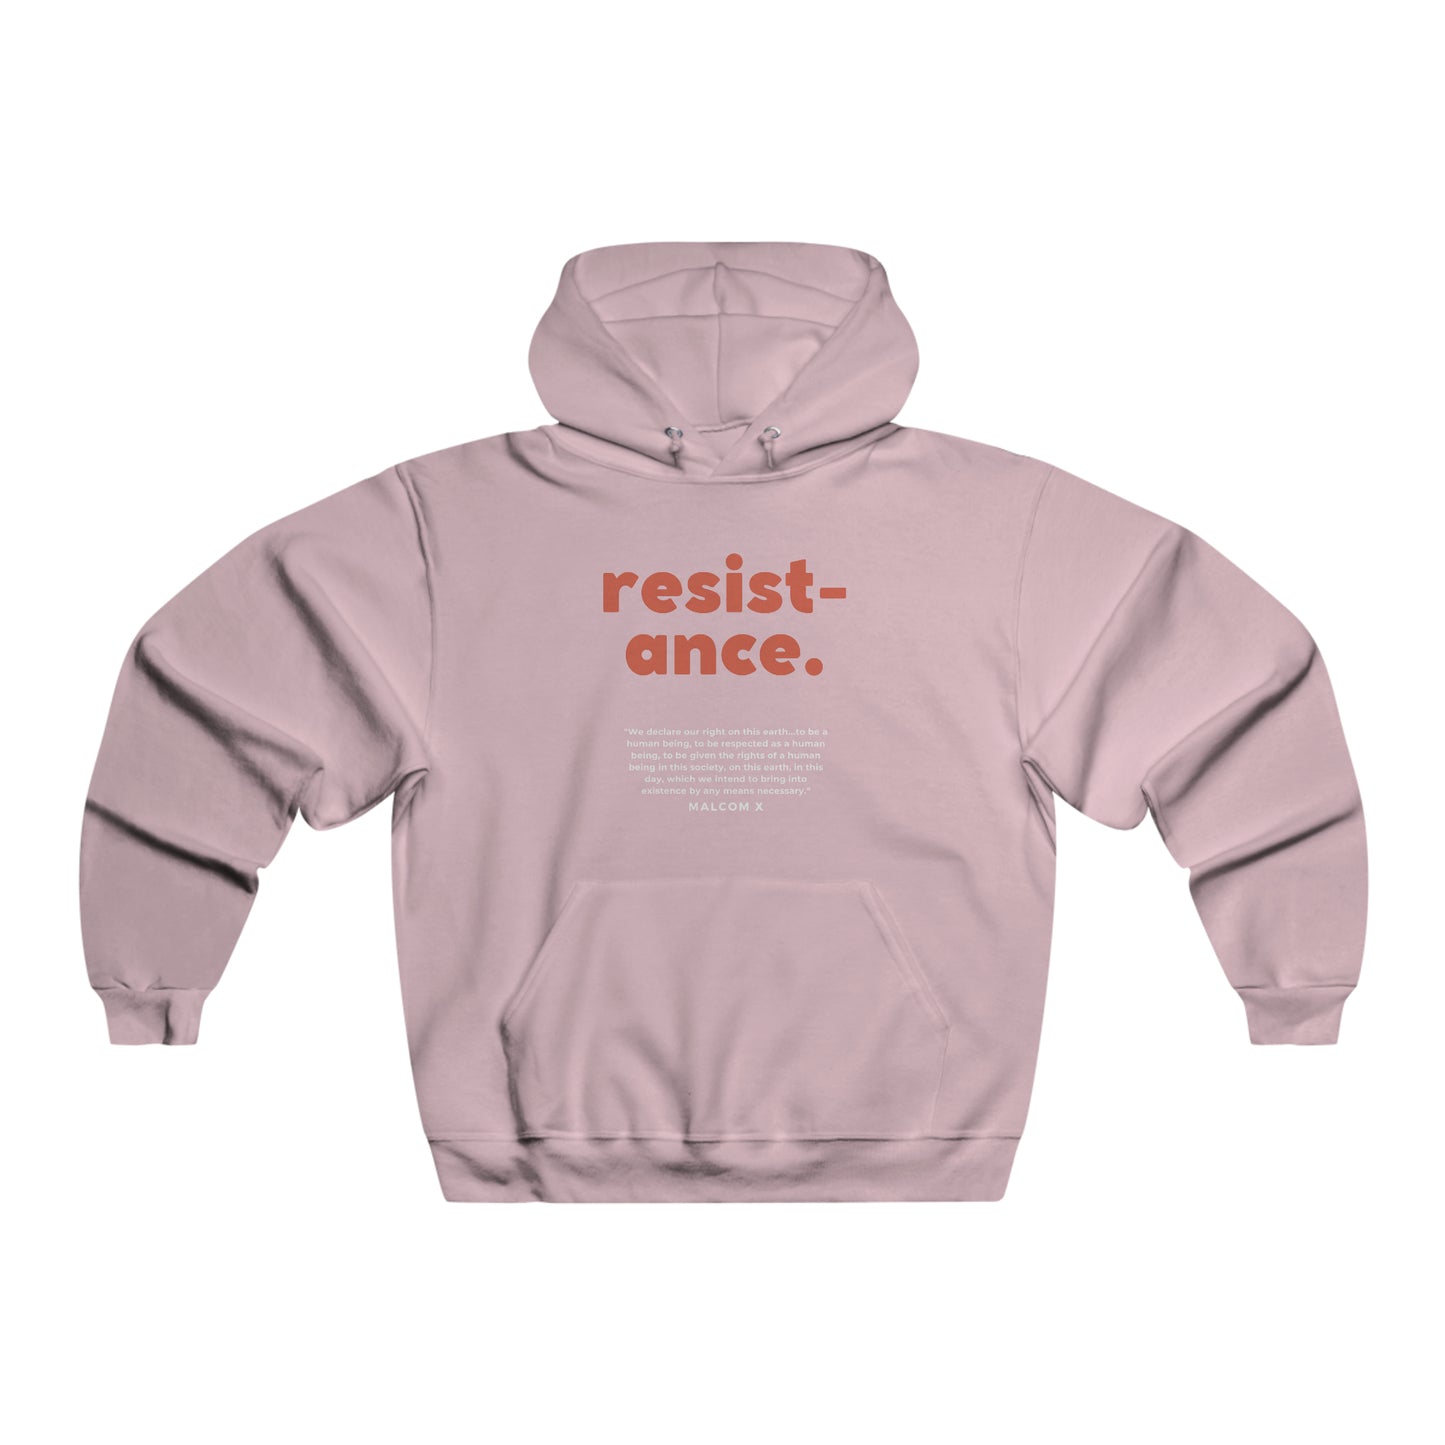 Signature Resistance Hoodie - Quote by Malcom X